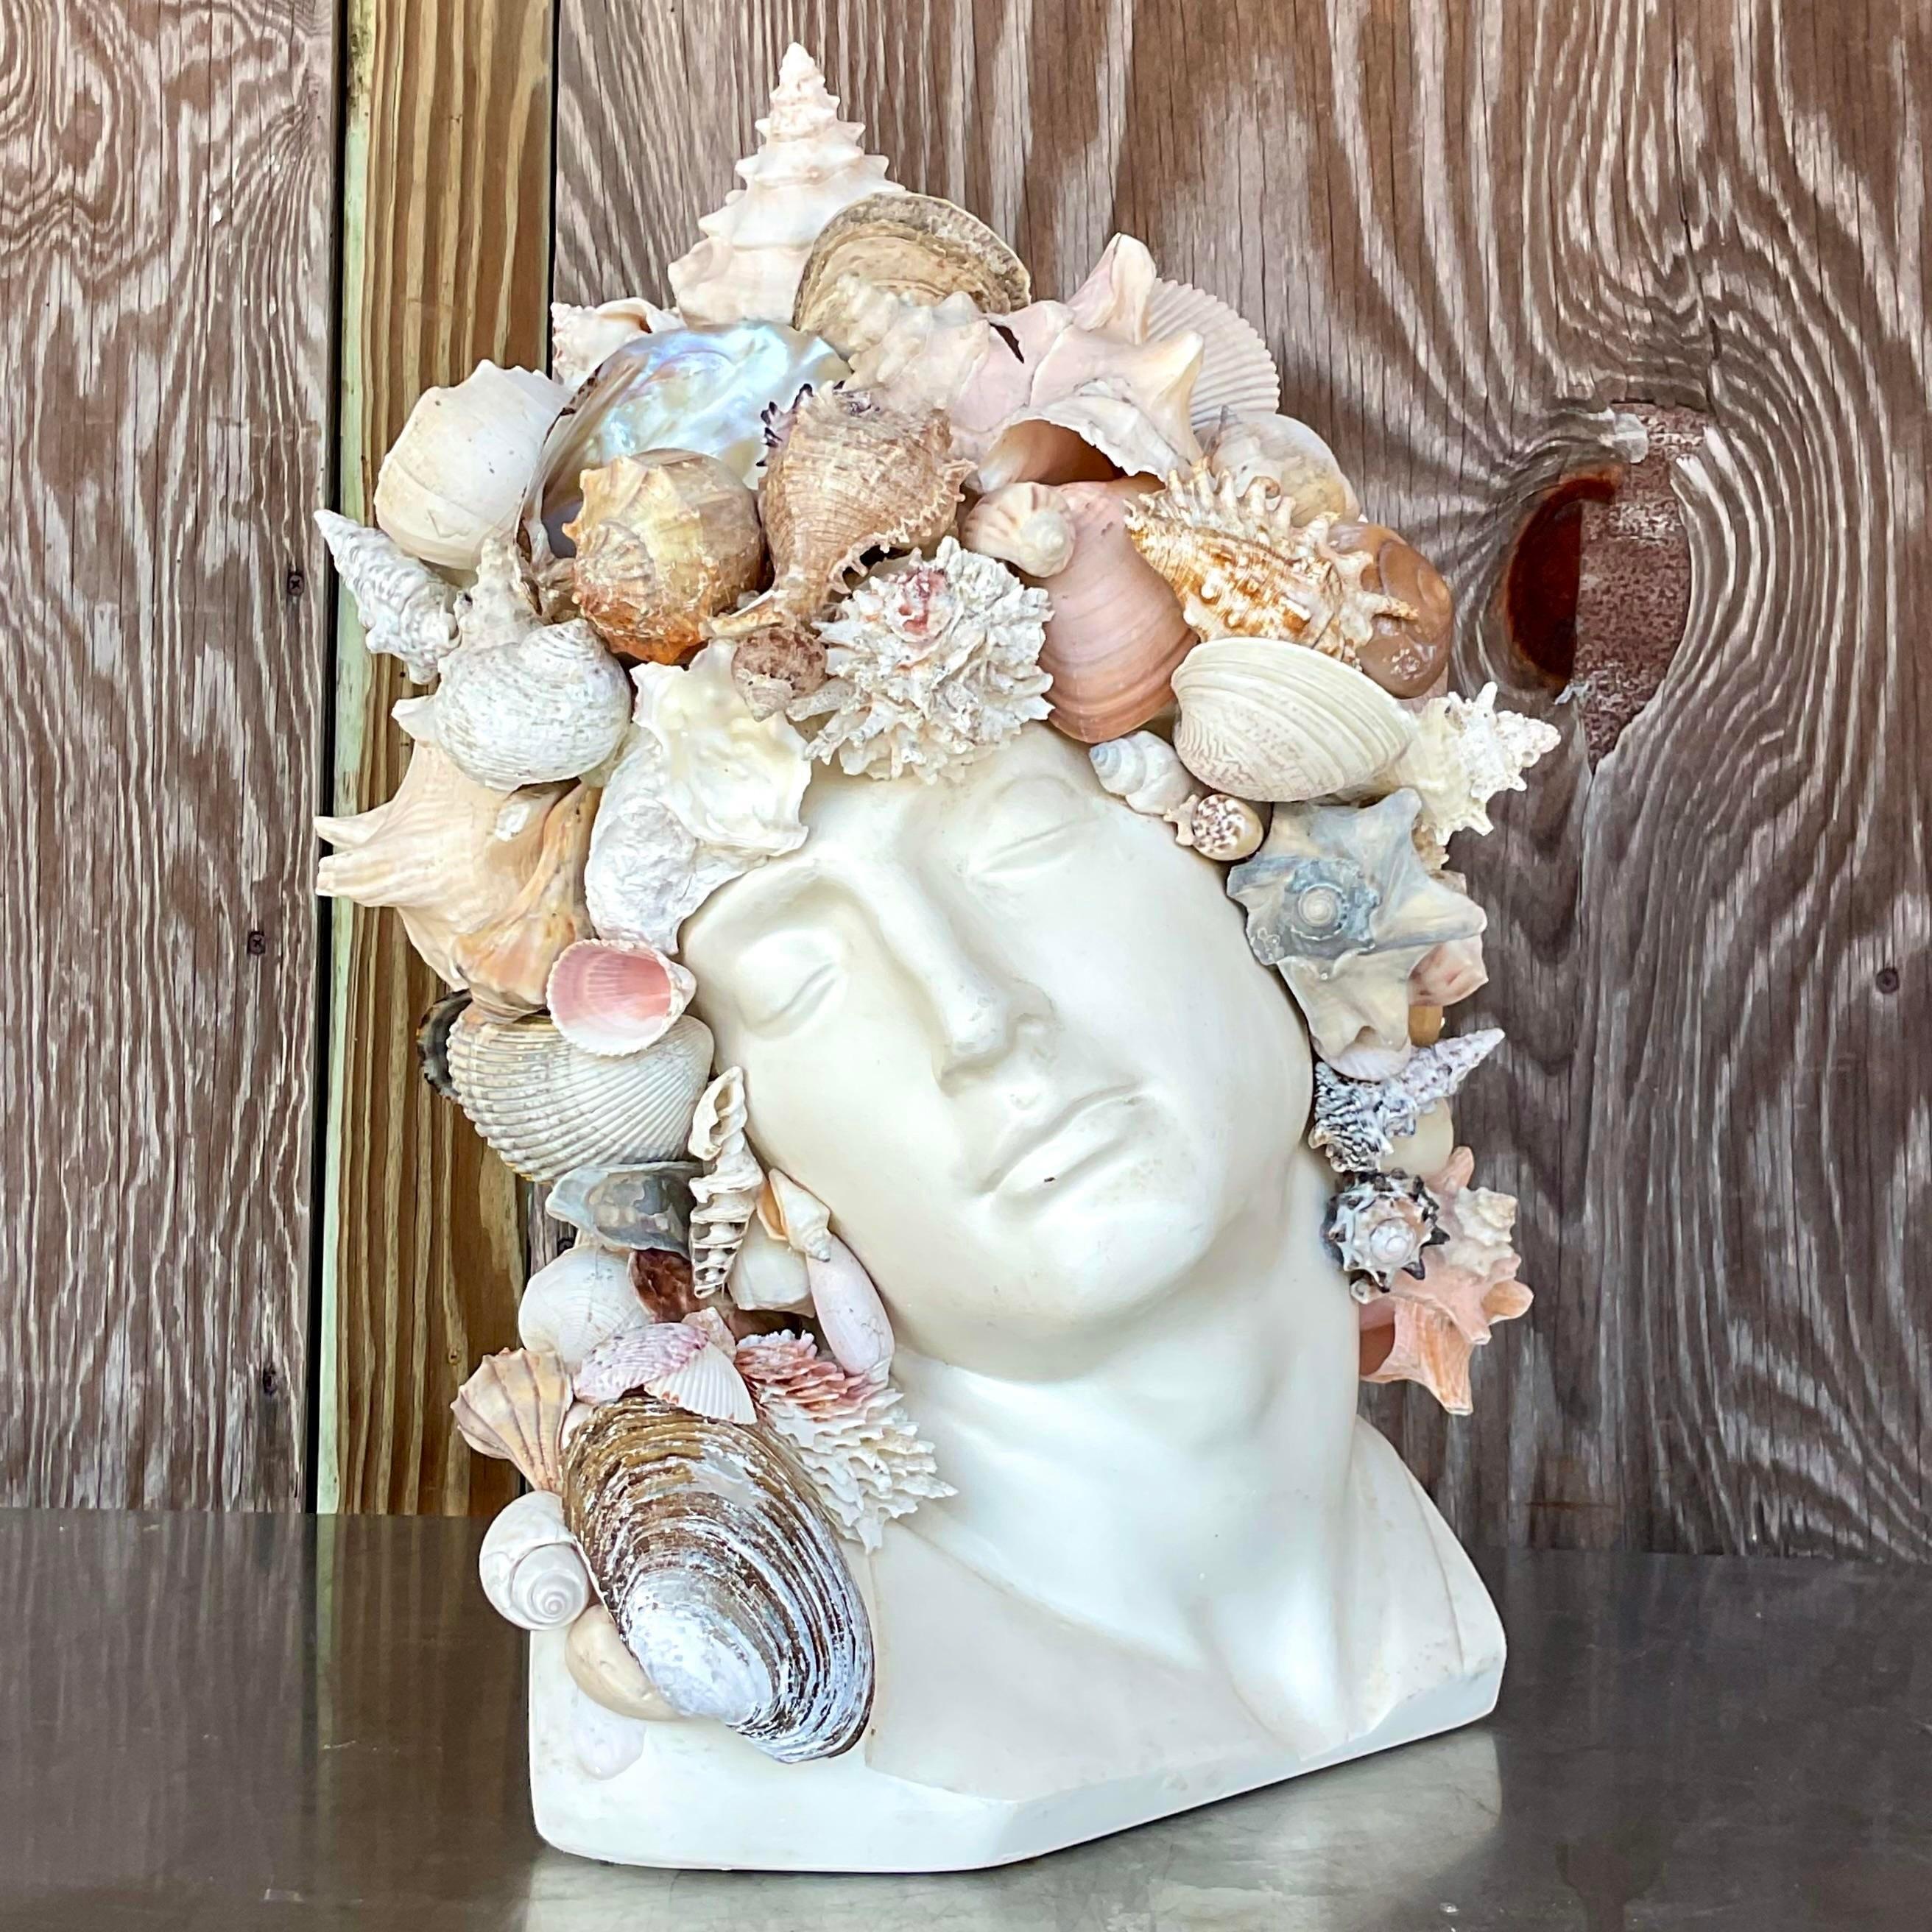 A stunning vintage plaster bust. A chic Shell encrusted man with all large and interesting shells. Sure to be the focal point of any space. Just add a plinth for extra drama. Acquired from a Palm Beach estate.